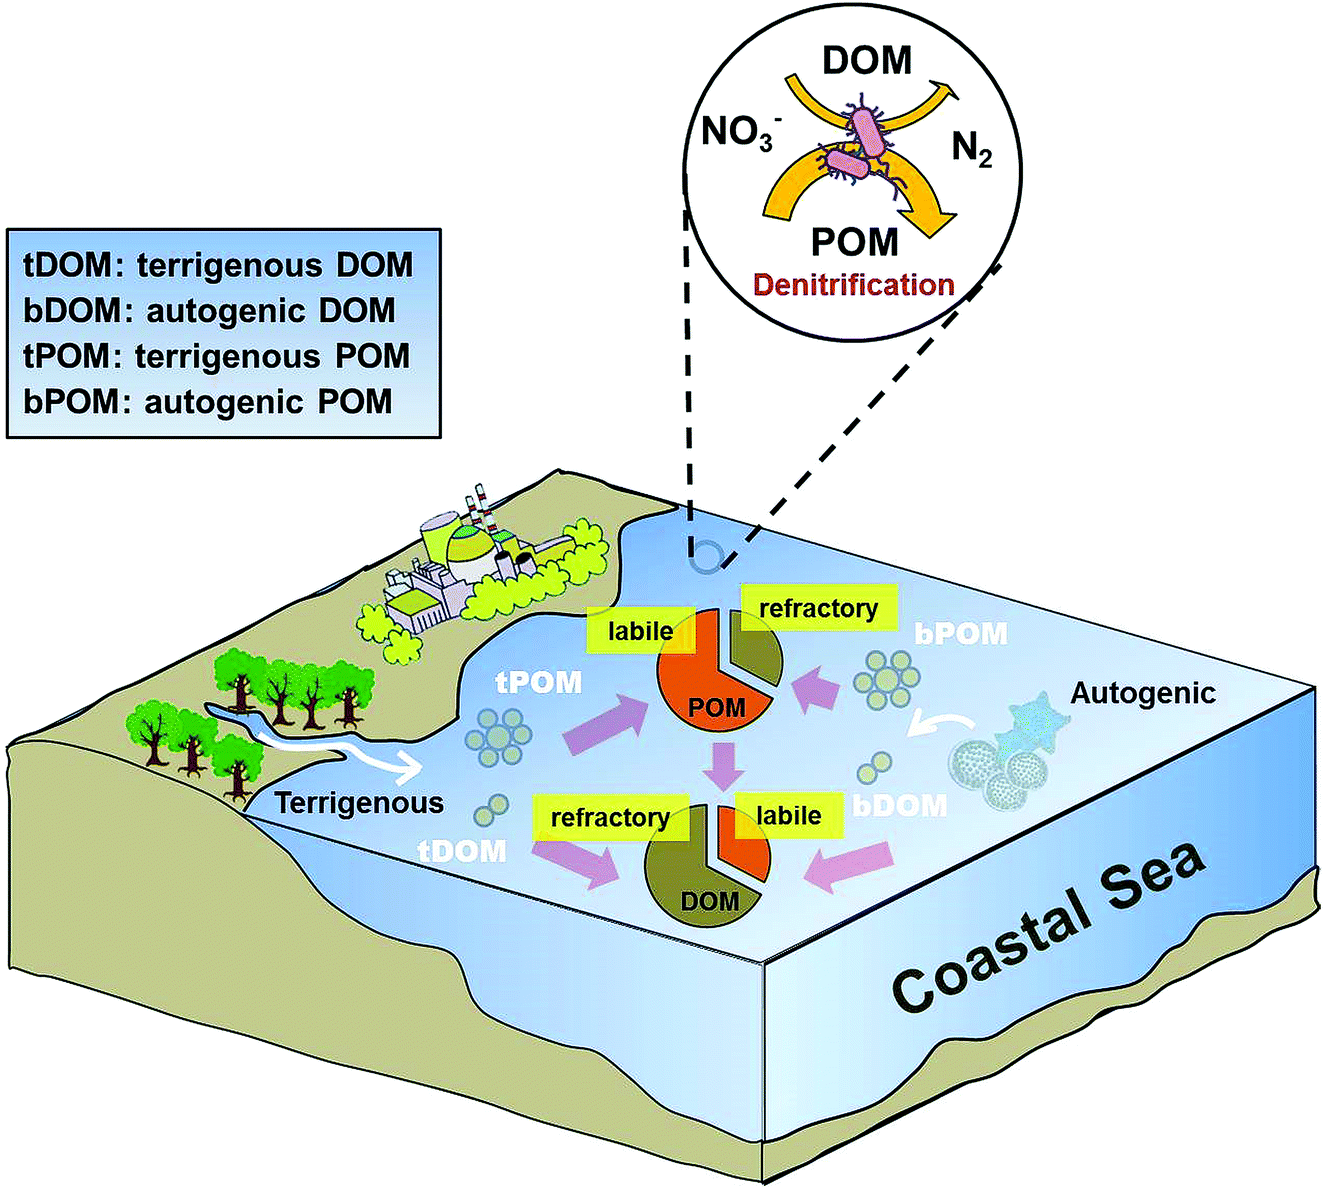 Role of organic components in regulating denitrification in the coastal  water of Daya Bay, southern China - Environmental Science: Processes &  Impacts (RSC Publishing) DOI:10.1039/C8EM00558C